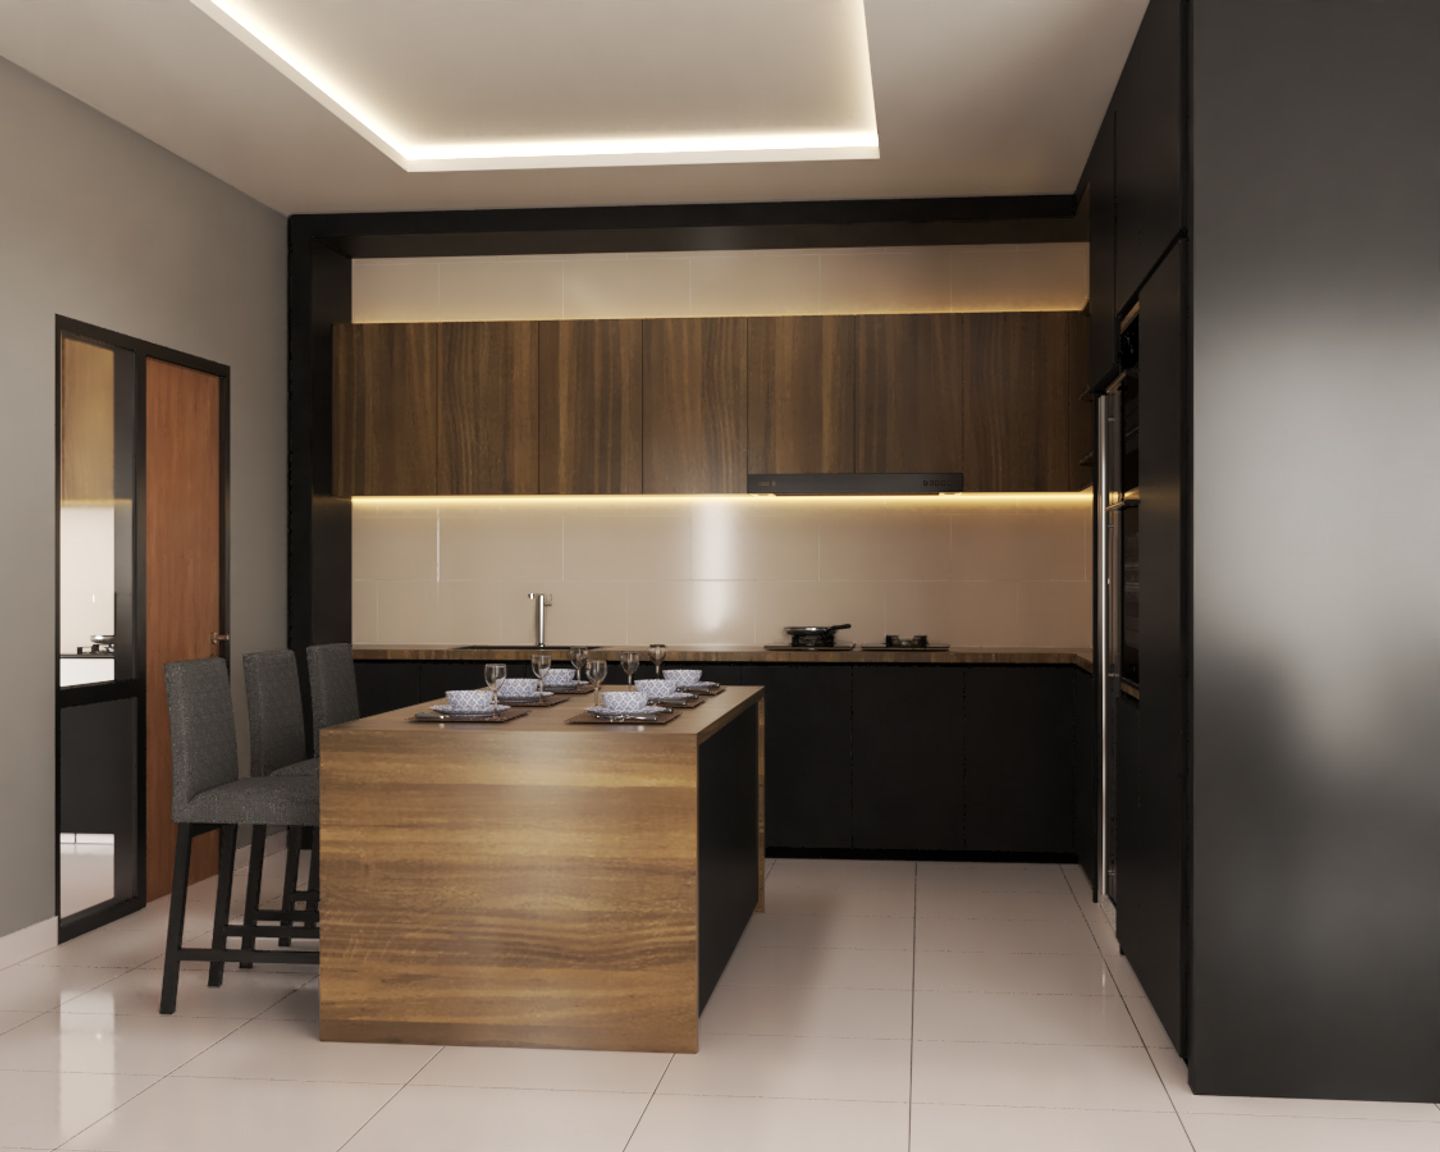 Modern Spacious Modular Kitchen Design With A Dining Area